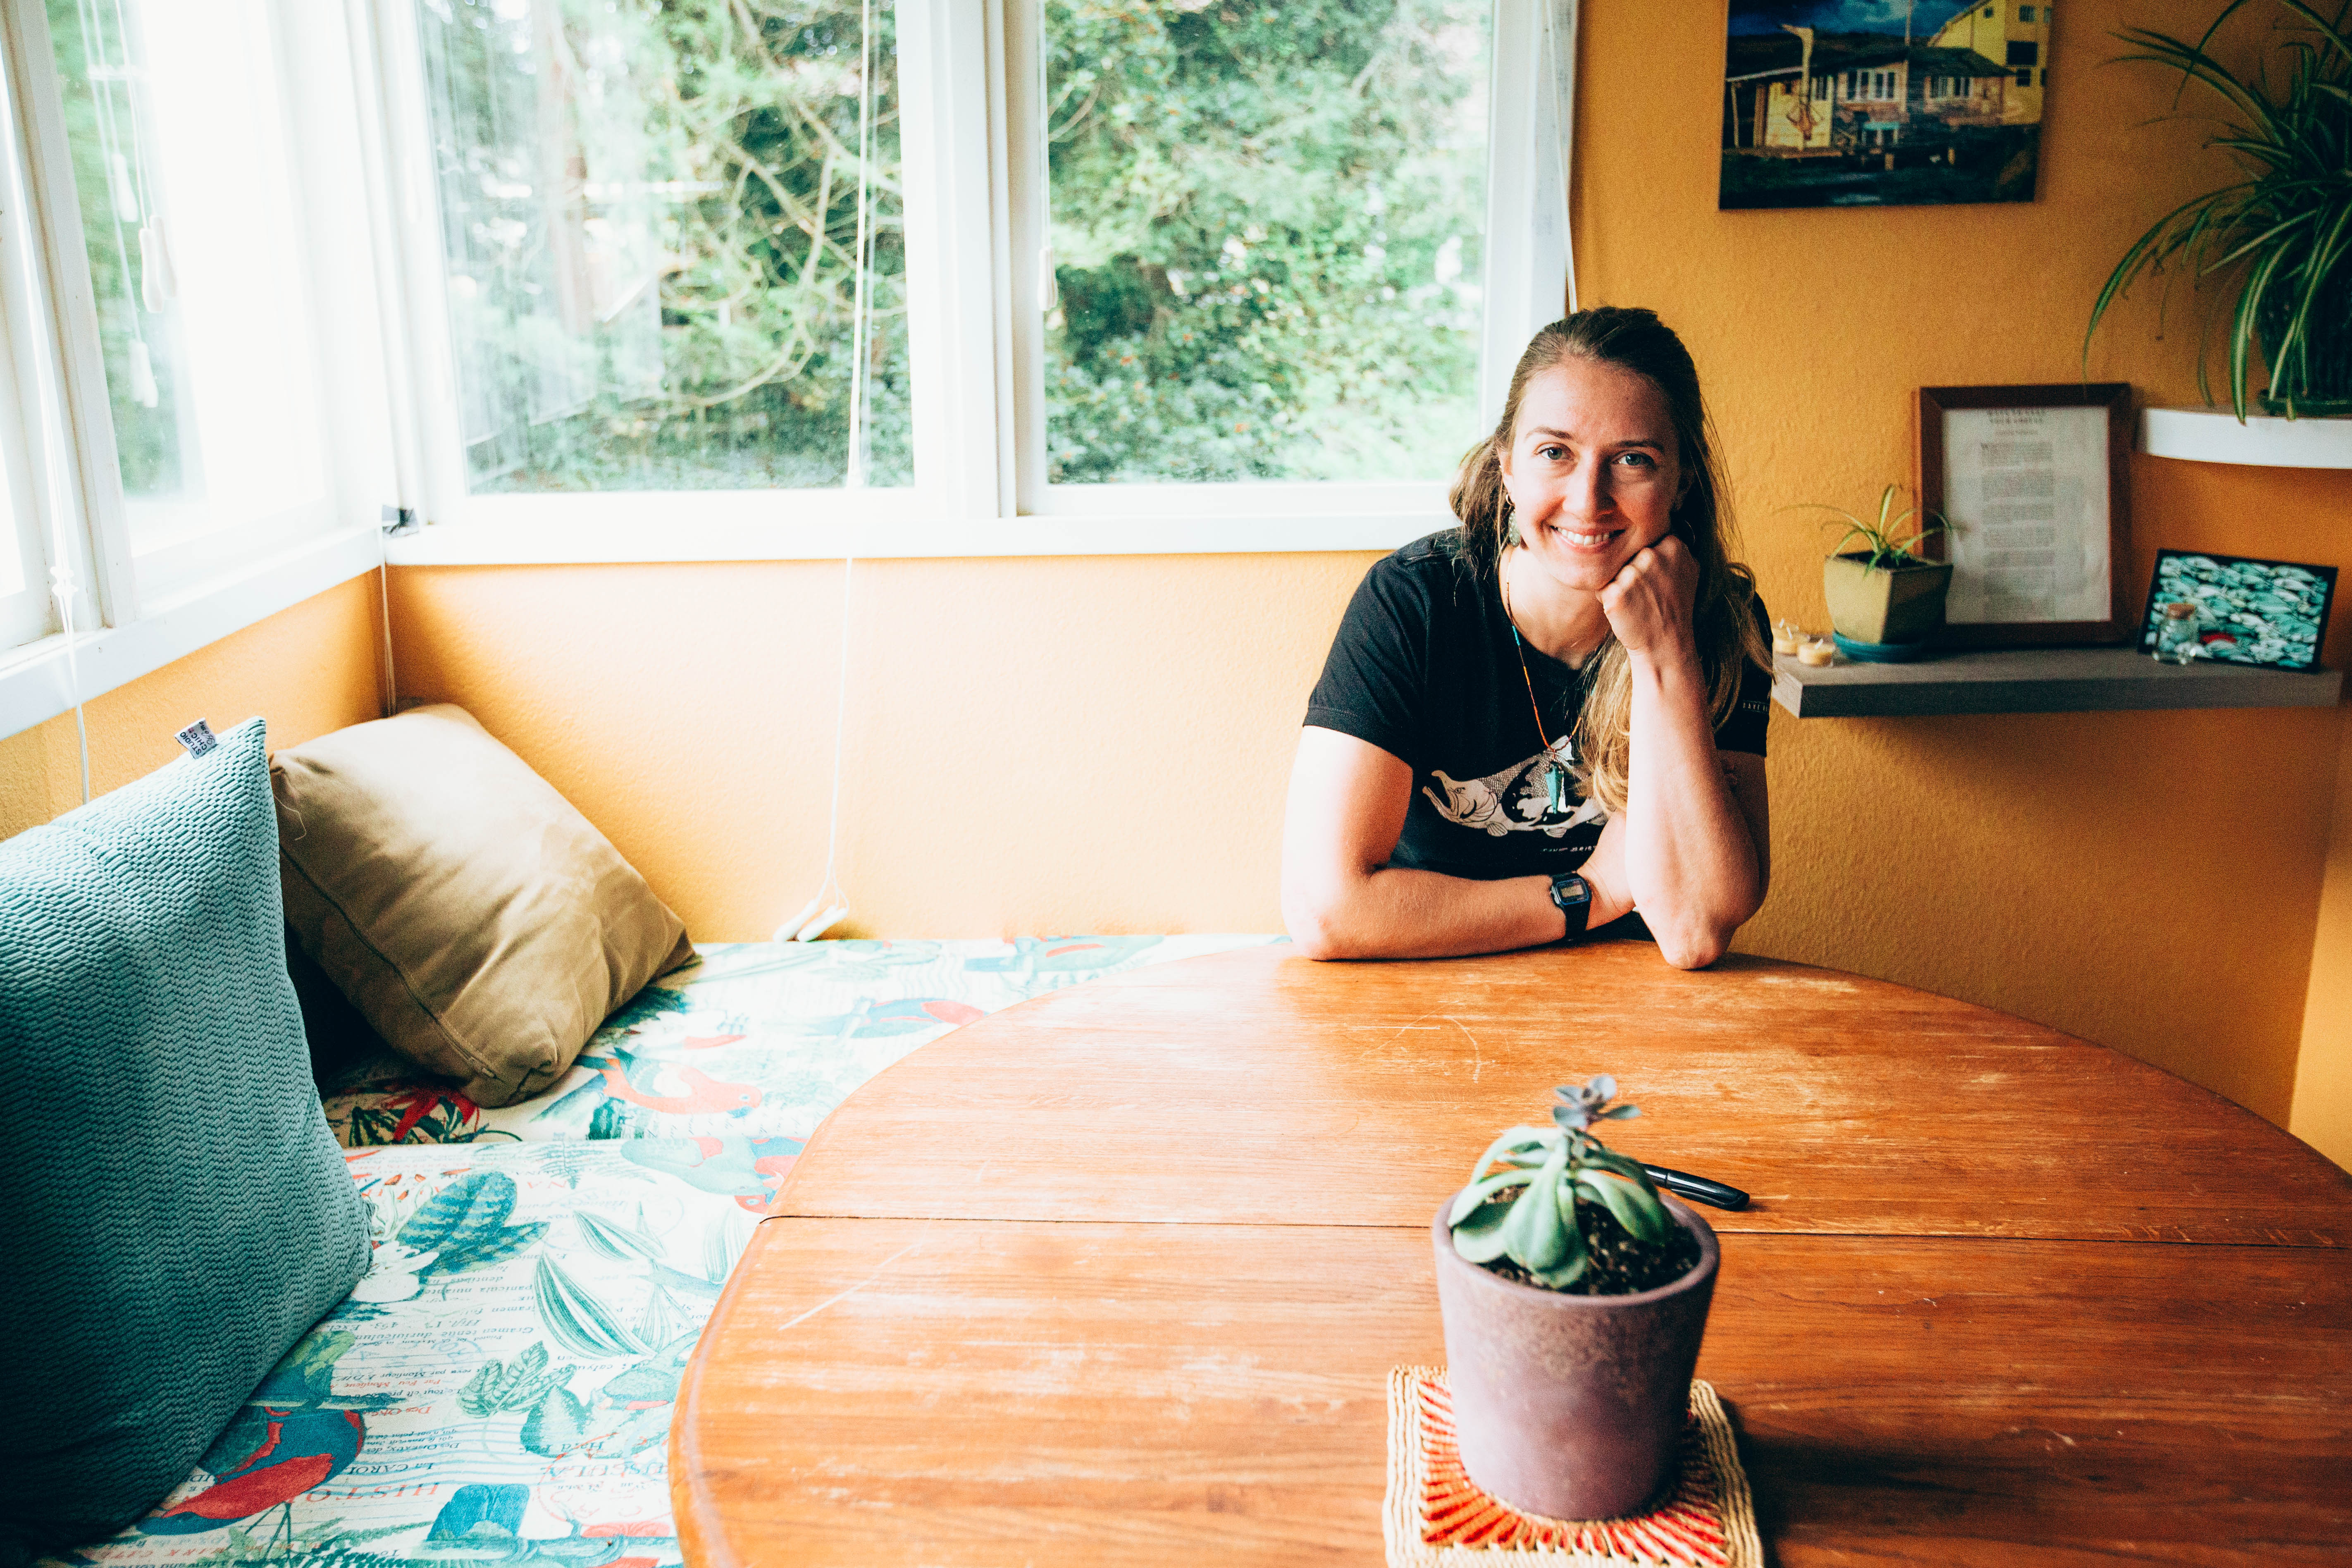 Shelly sits at the table in her house in Bellingham, Wash., on Thursday, May 2, 2019. (Photo by Regan Bervar)